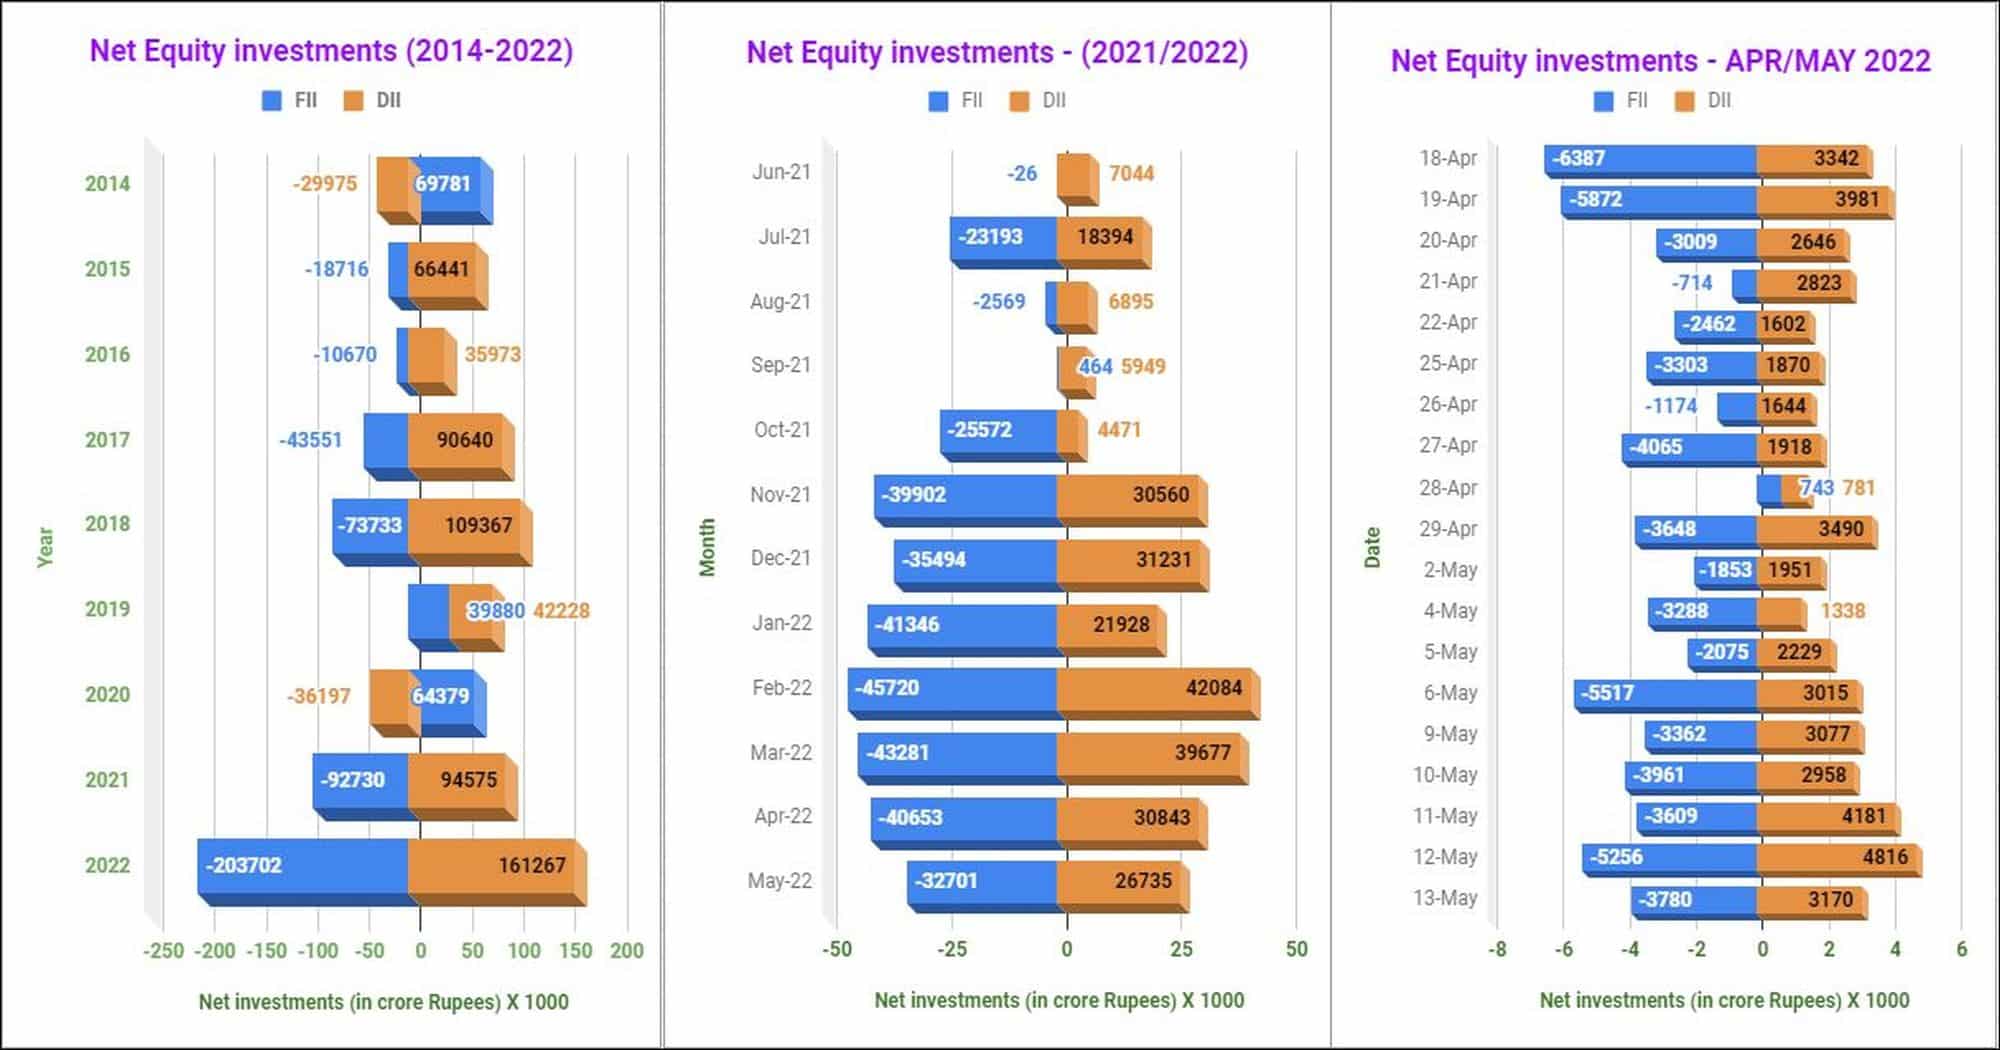 Net equity investments